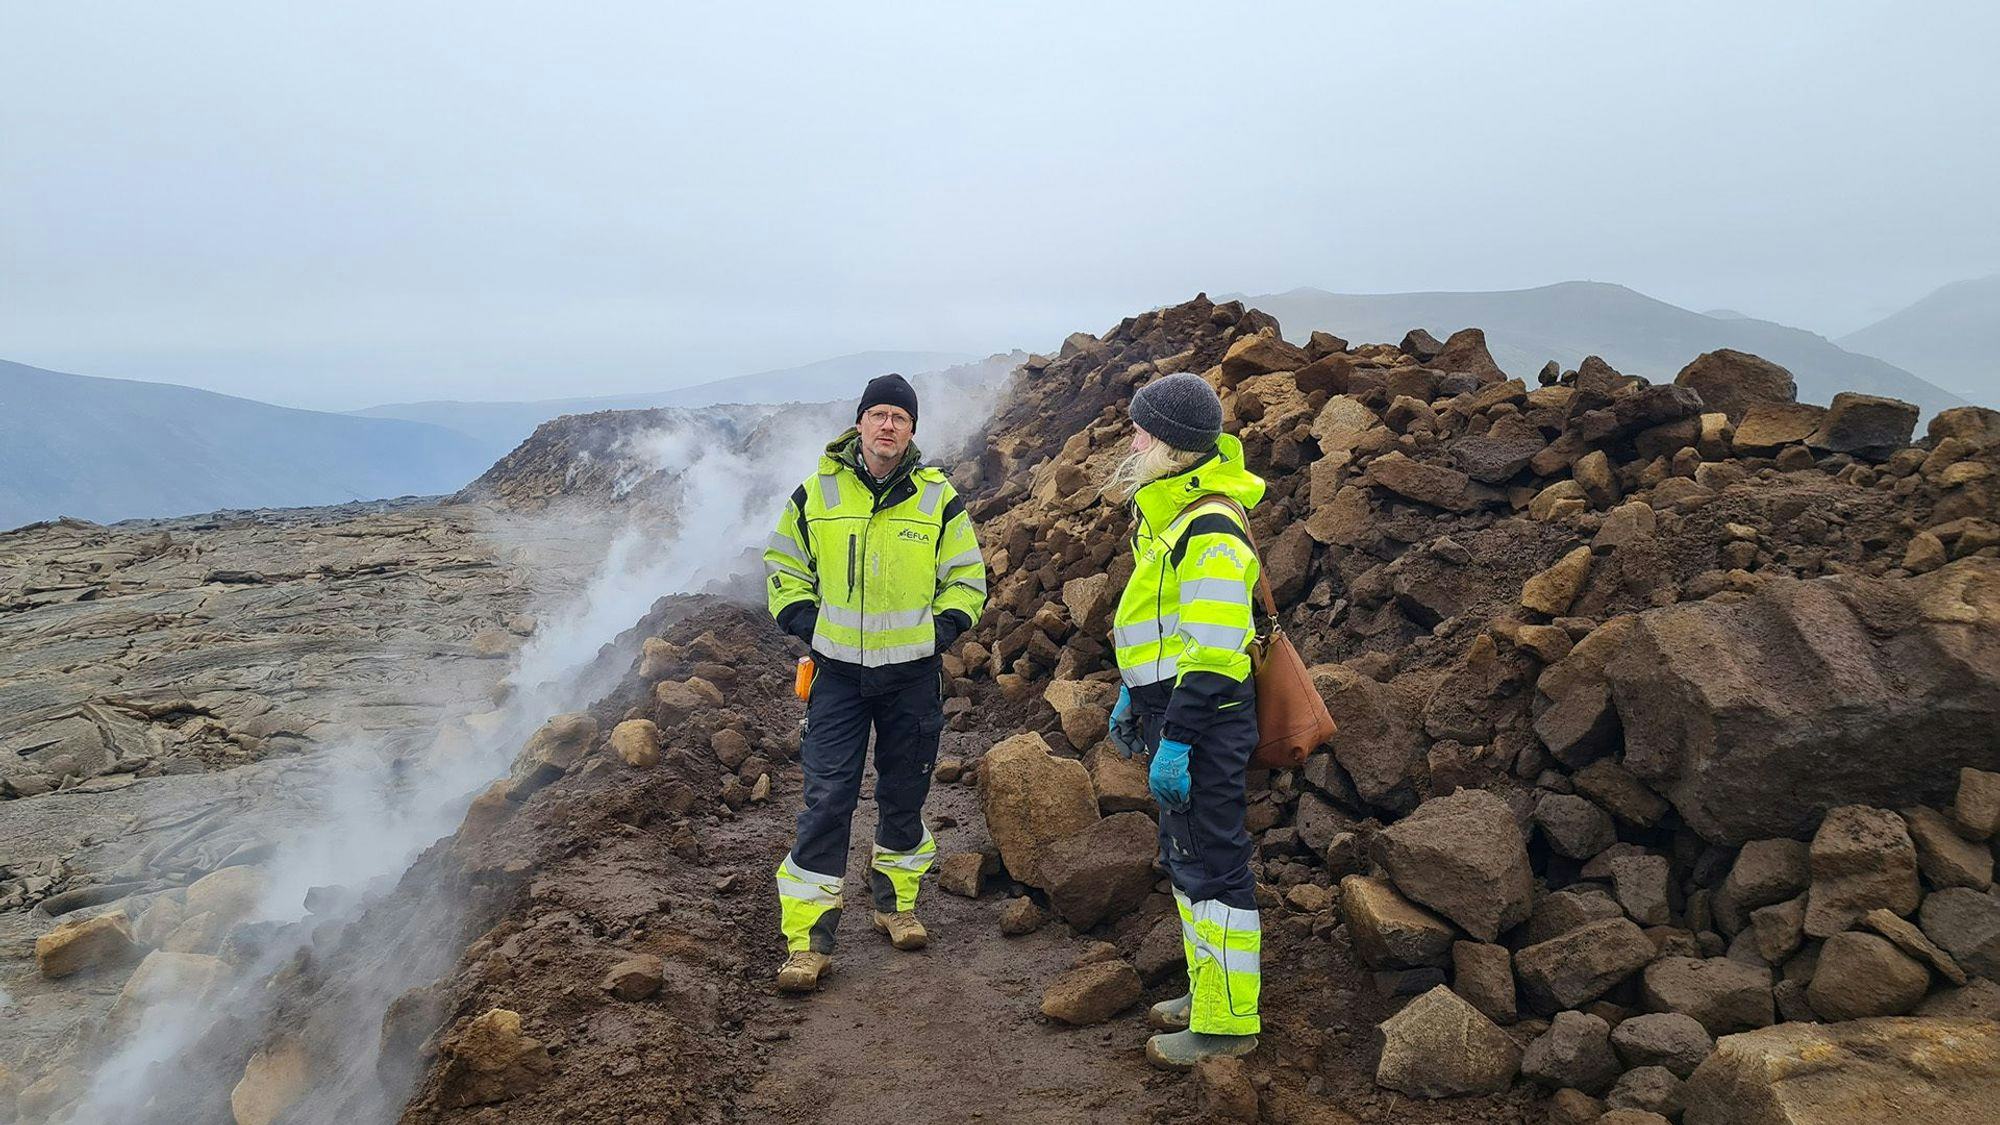 Two individuals in high visibility jackets are standing on a rocky terrain with steam rising in the background